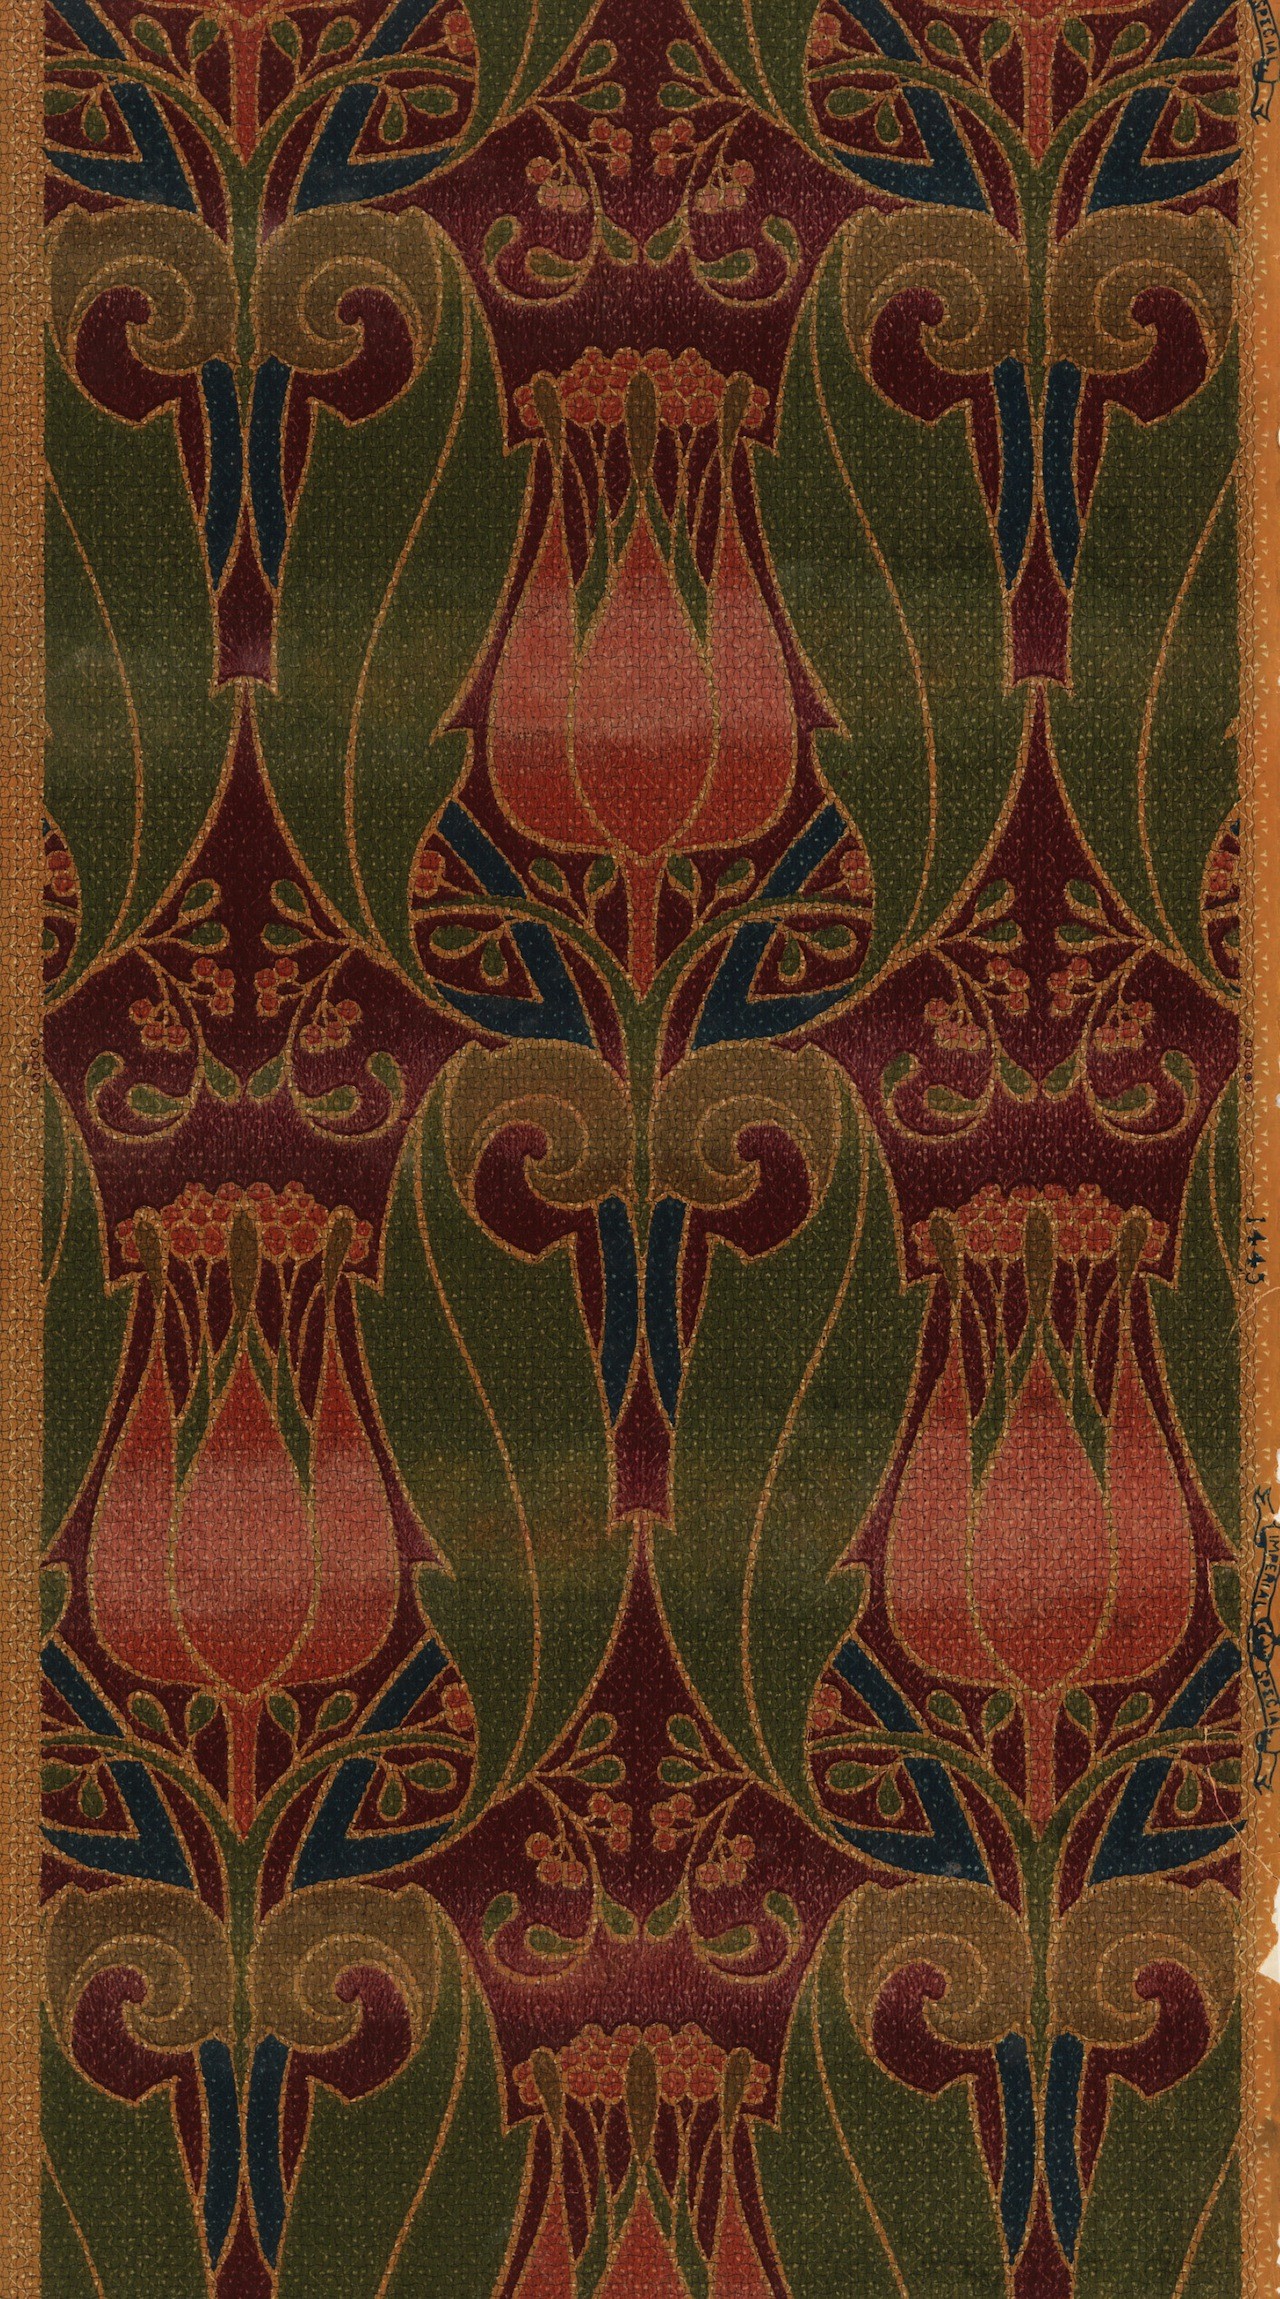 1280x2299 More Than 6,000 Wallpaper Designs Digitized. (Pictured: Art Nouveau  wallpaper with tulips and